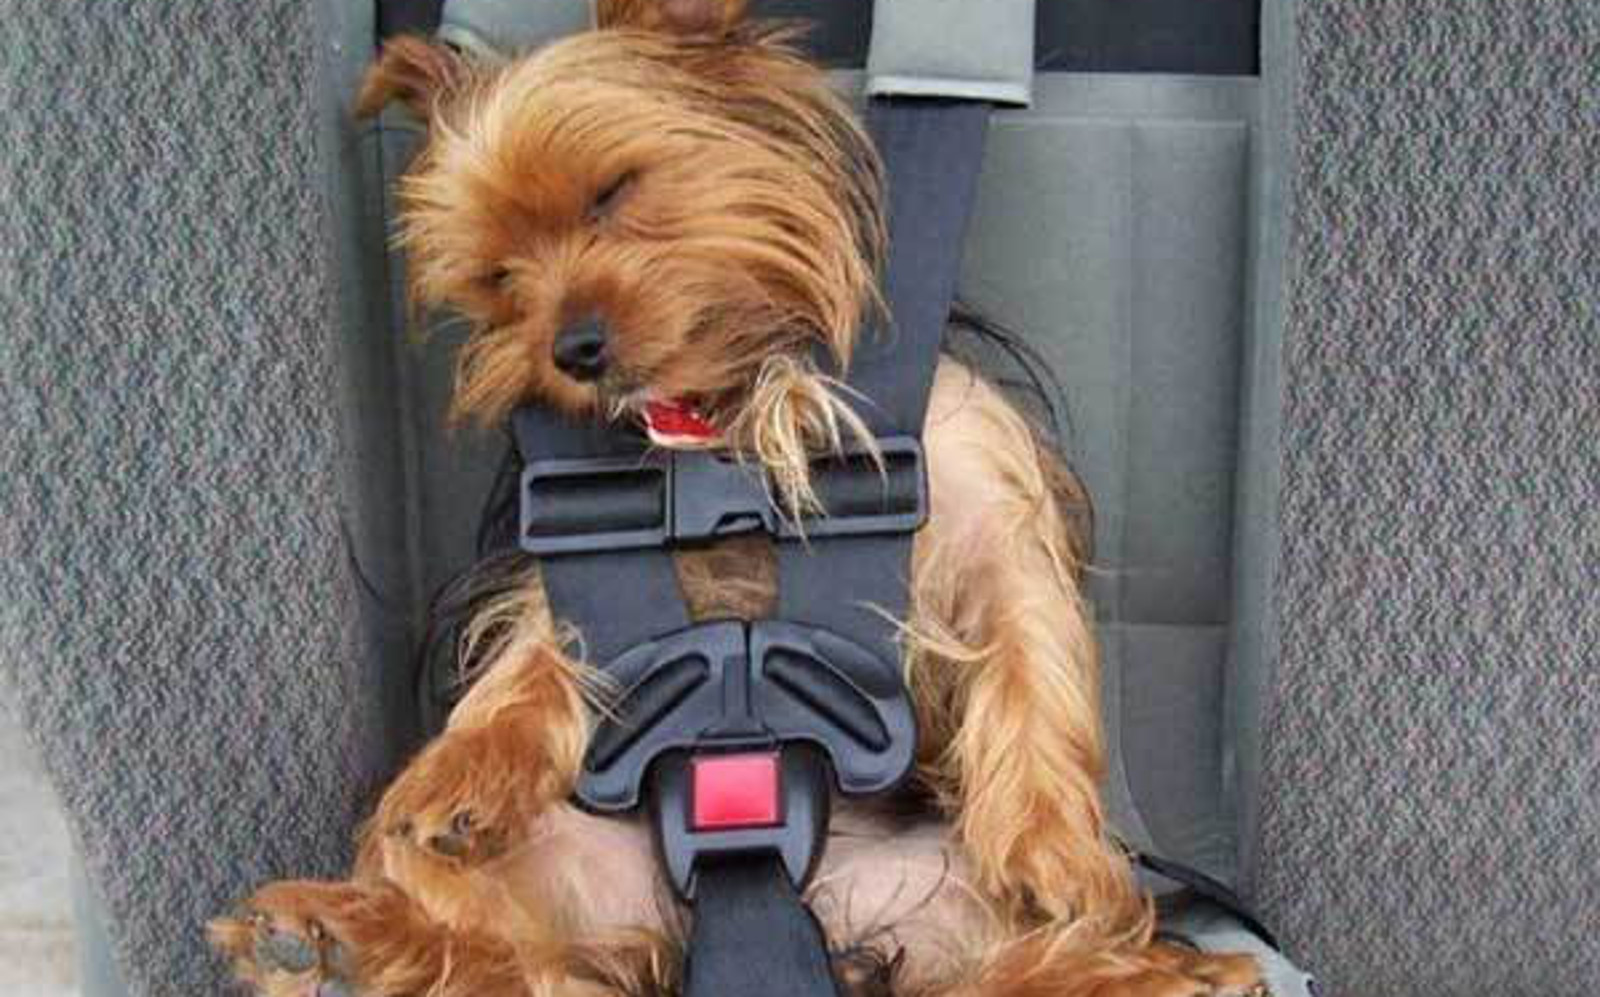 15 Times Humans Treated Their Dogs Like Their Own Babies (PHOTOS)